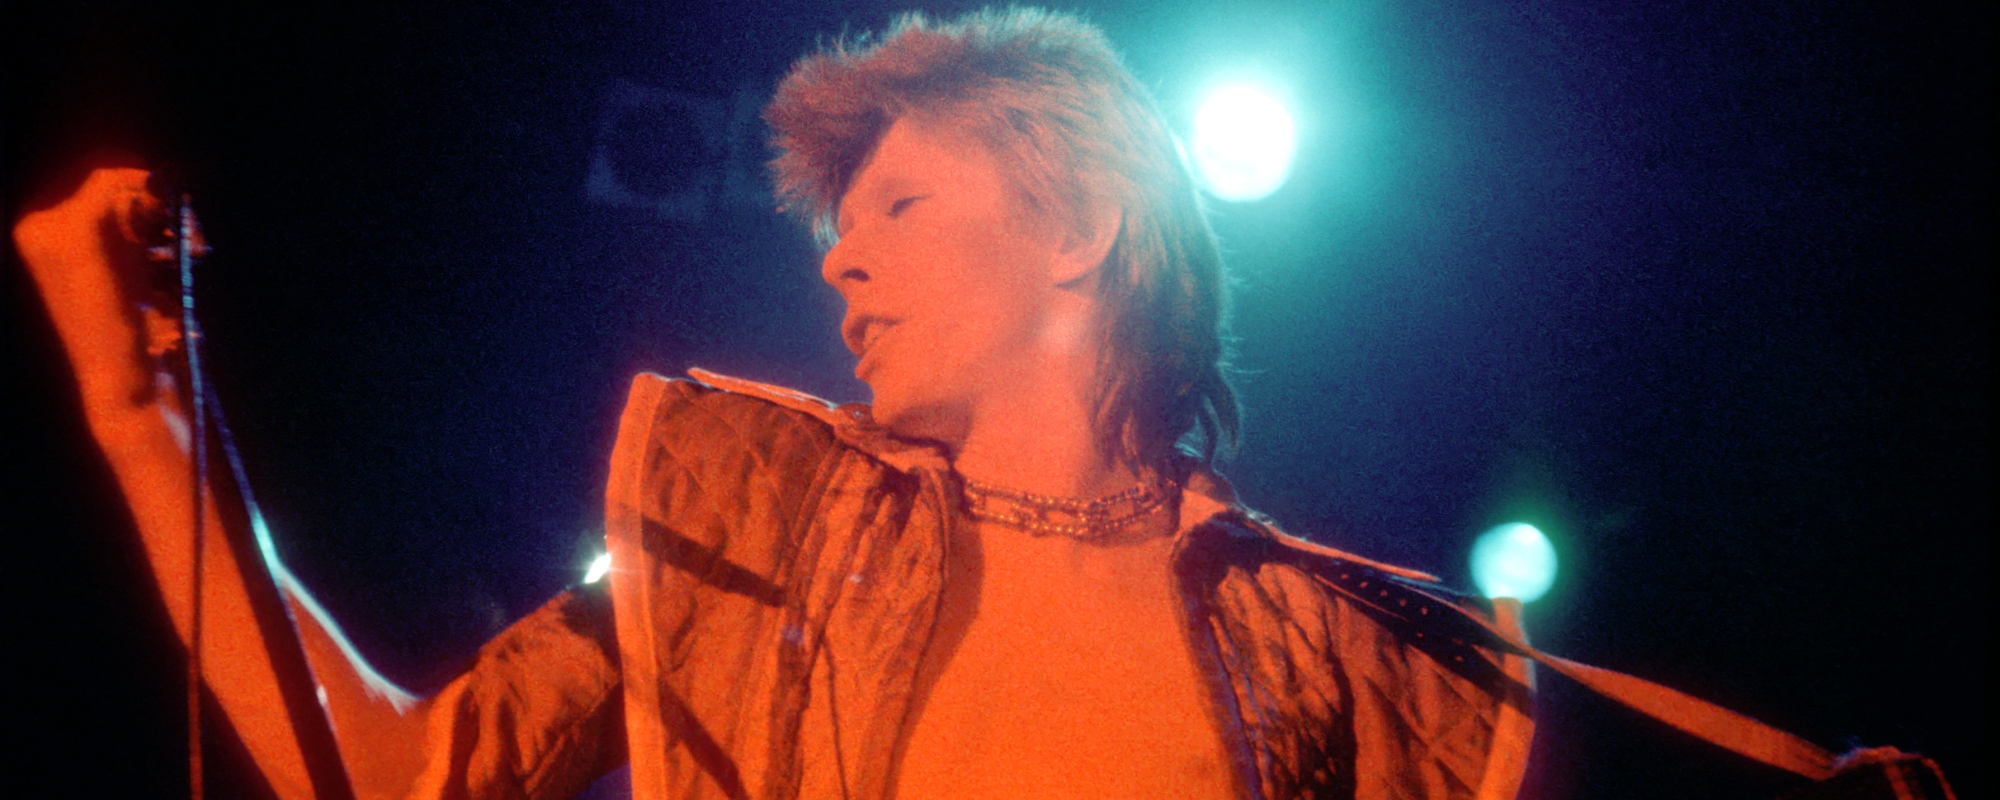 New Collection of David Bowie Recordings From ‘Ziggy Stardust’ Era To Be Released for Record Store Day